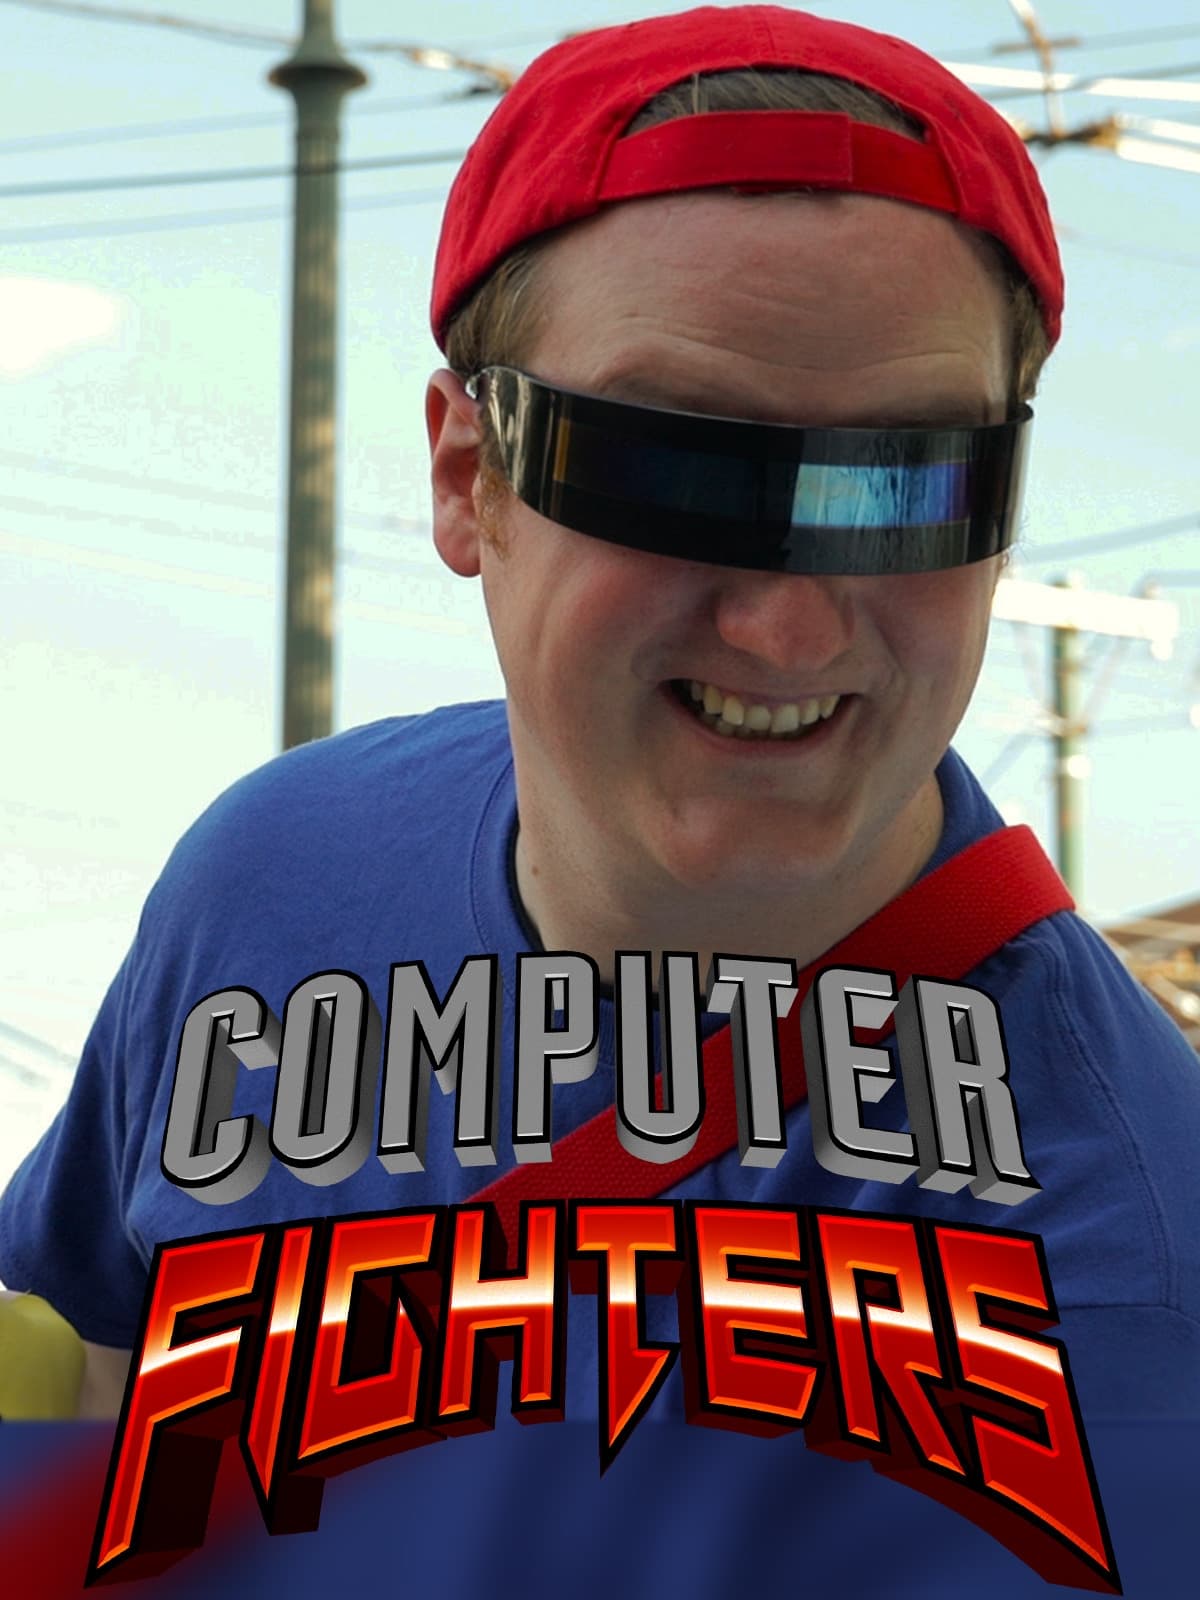 Computer Fighters